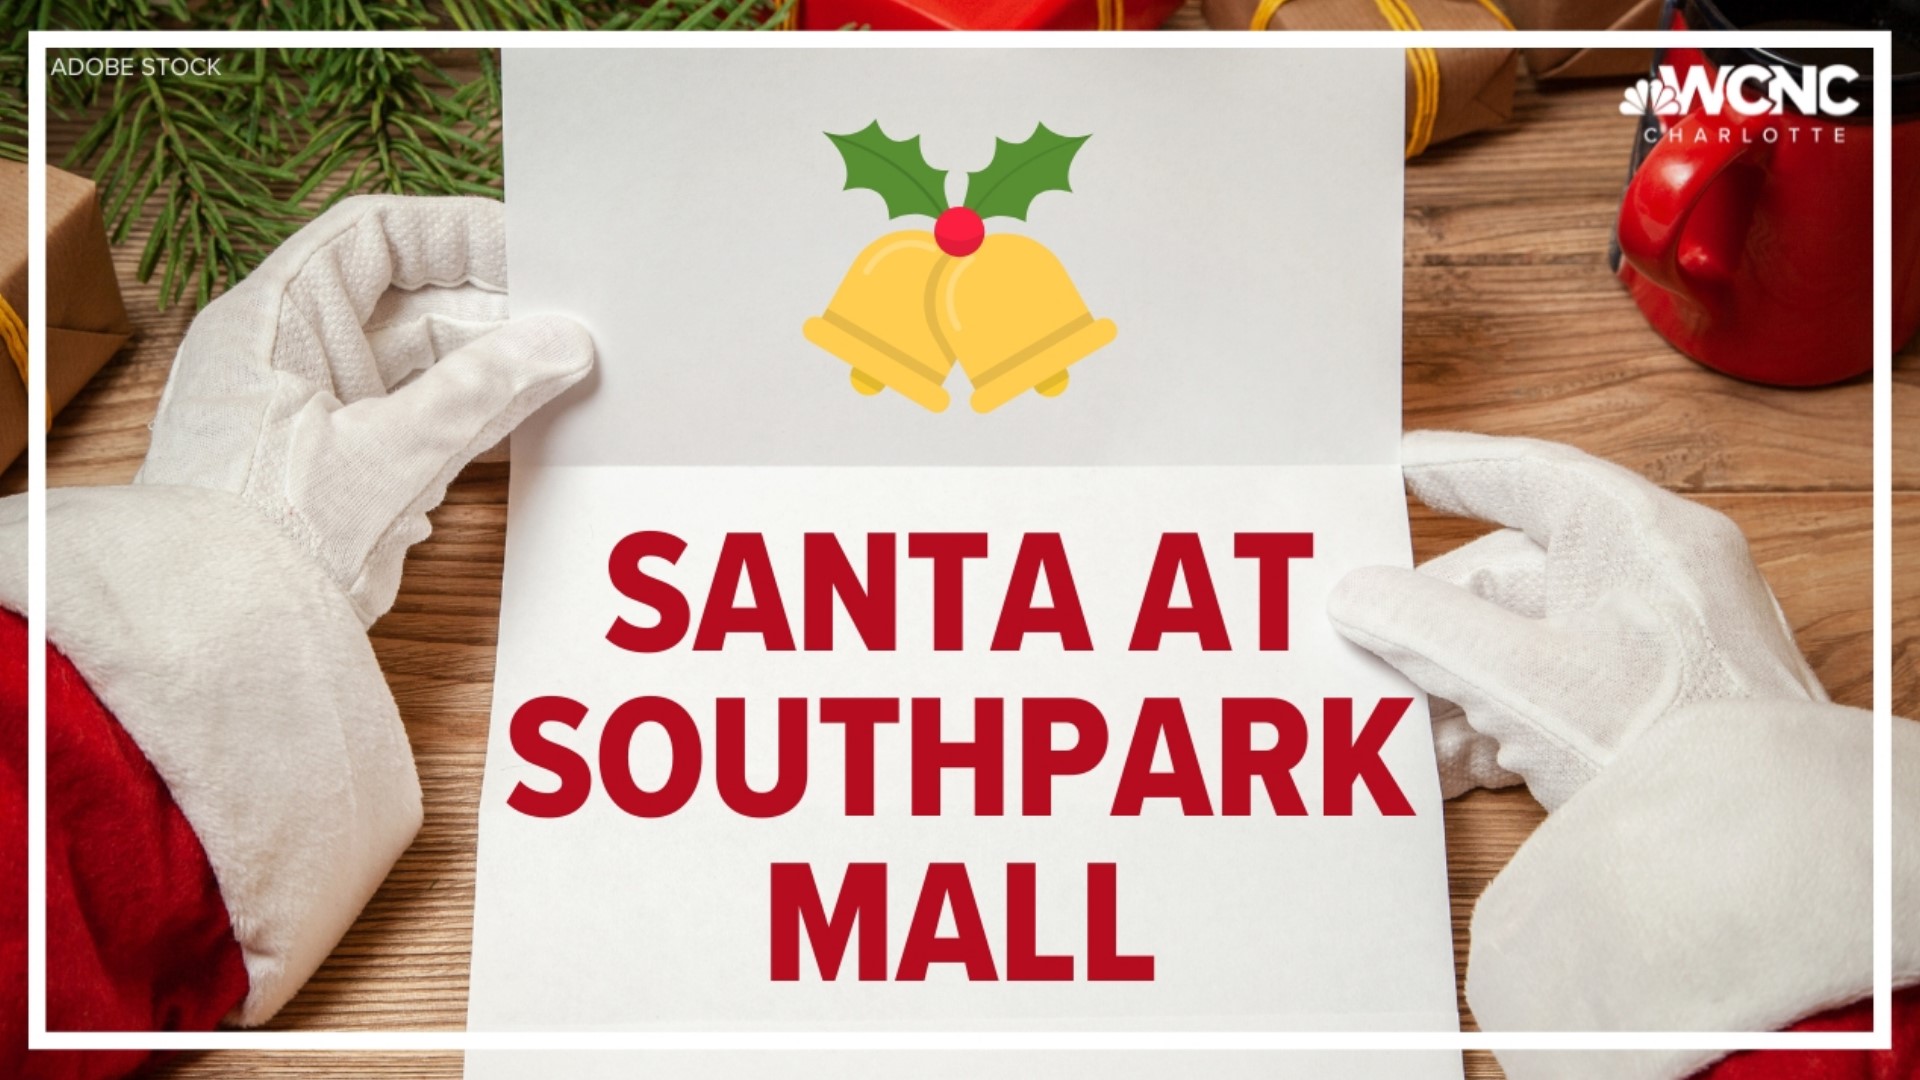 Starting Friday, Nov. 11, Santa's sleigh will be at SouthPark Mall so all the good boys and girls can meet him during the holiday season.